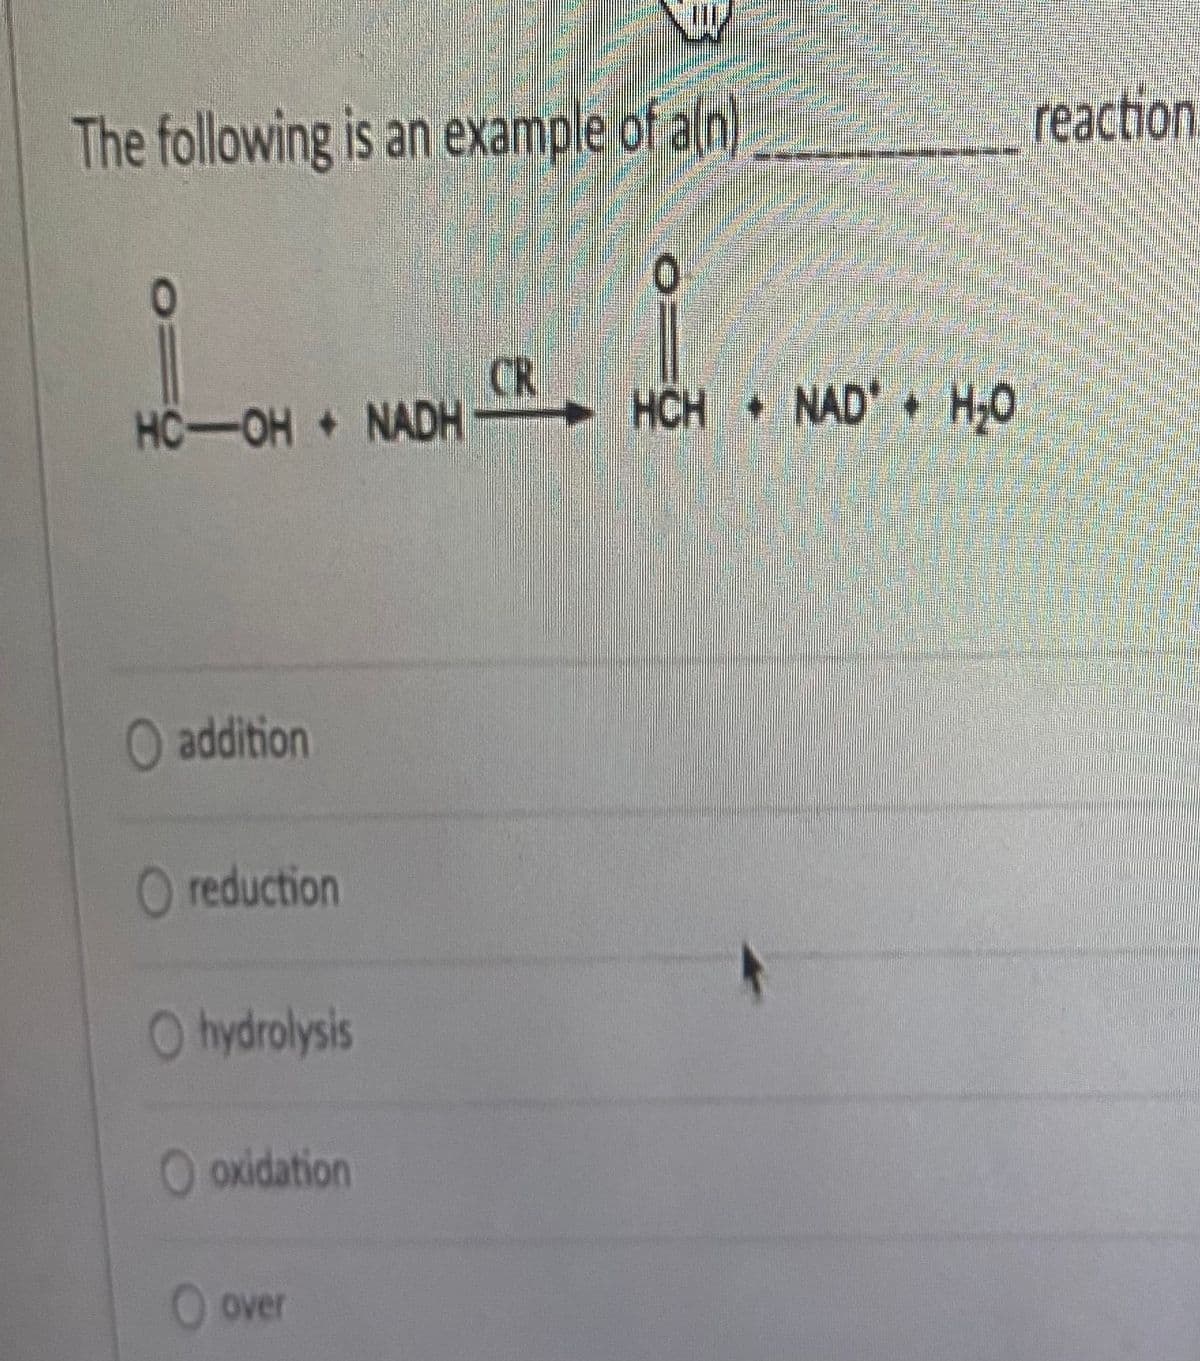 The following is an example of a(n)
HC-OH + NADHC HCH + NAD* + H₂0
O addition
O reduction
Ohydrolysis
O oxidation
O over
reaction.